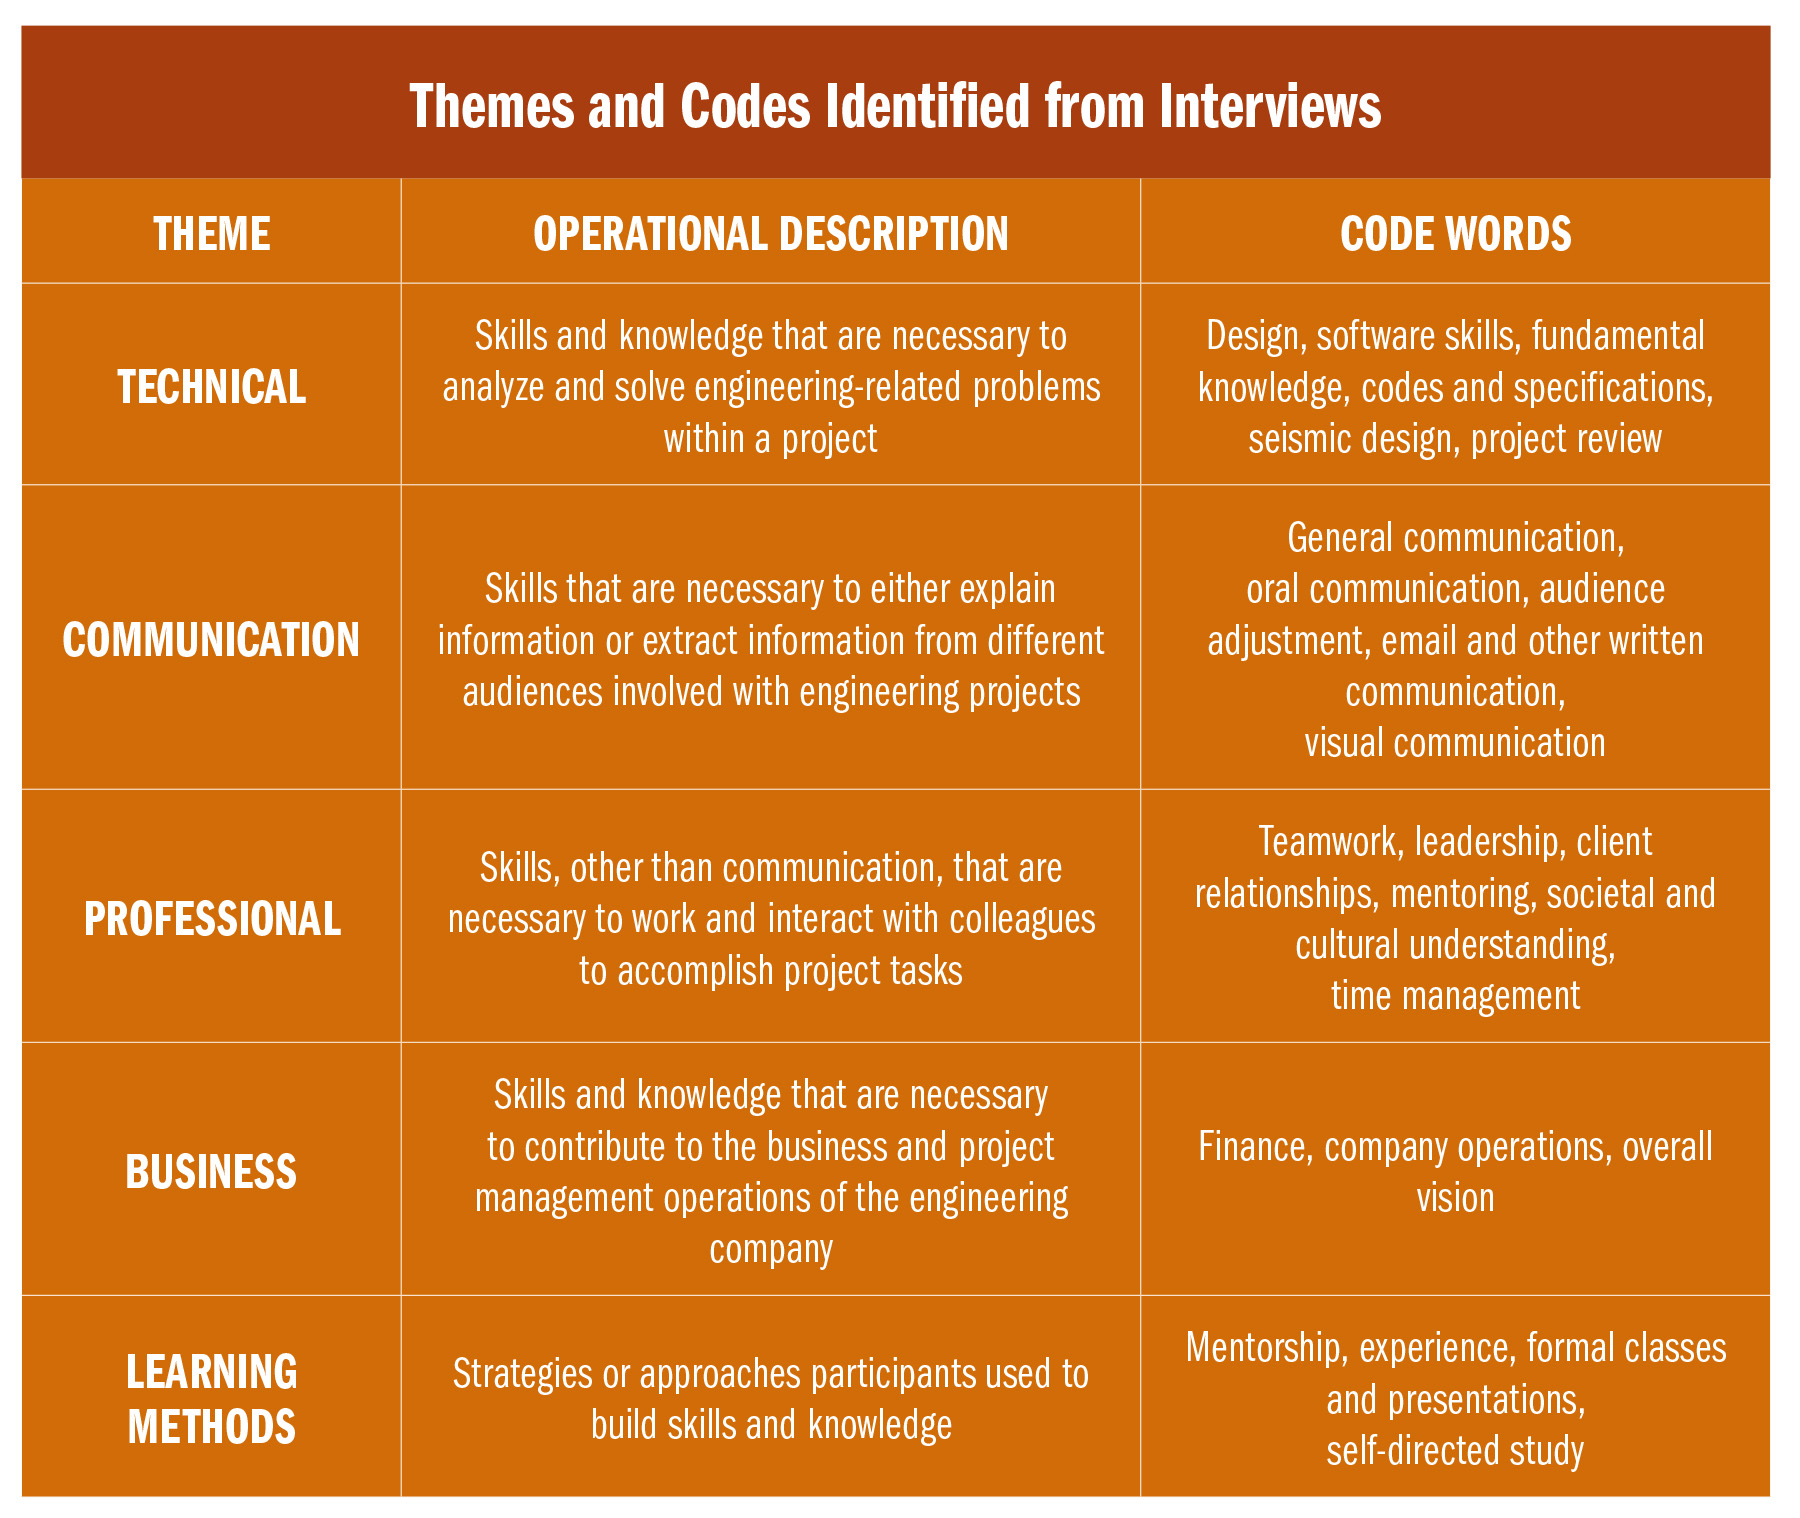 Table shows a listing of themes and codewords related to lifelong learning. 